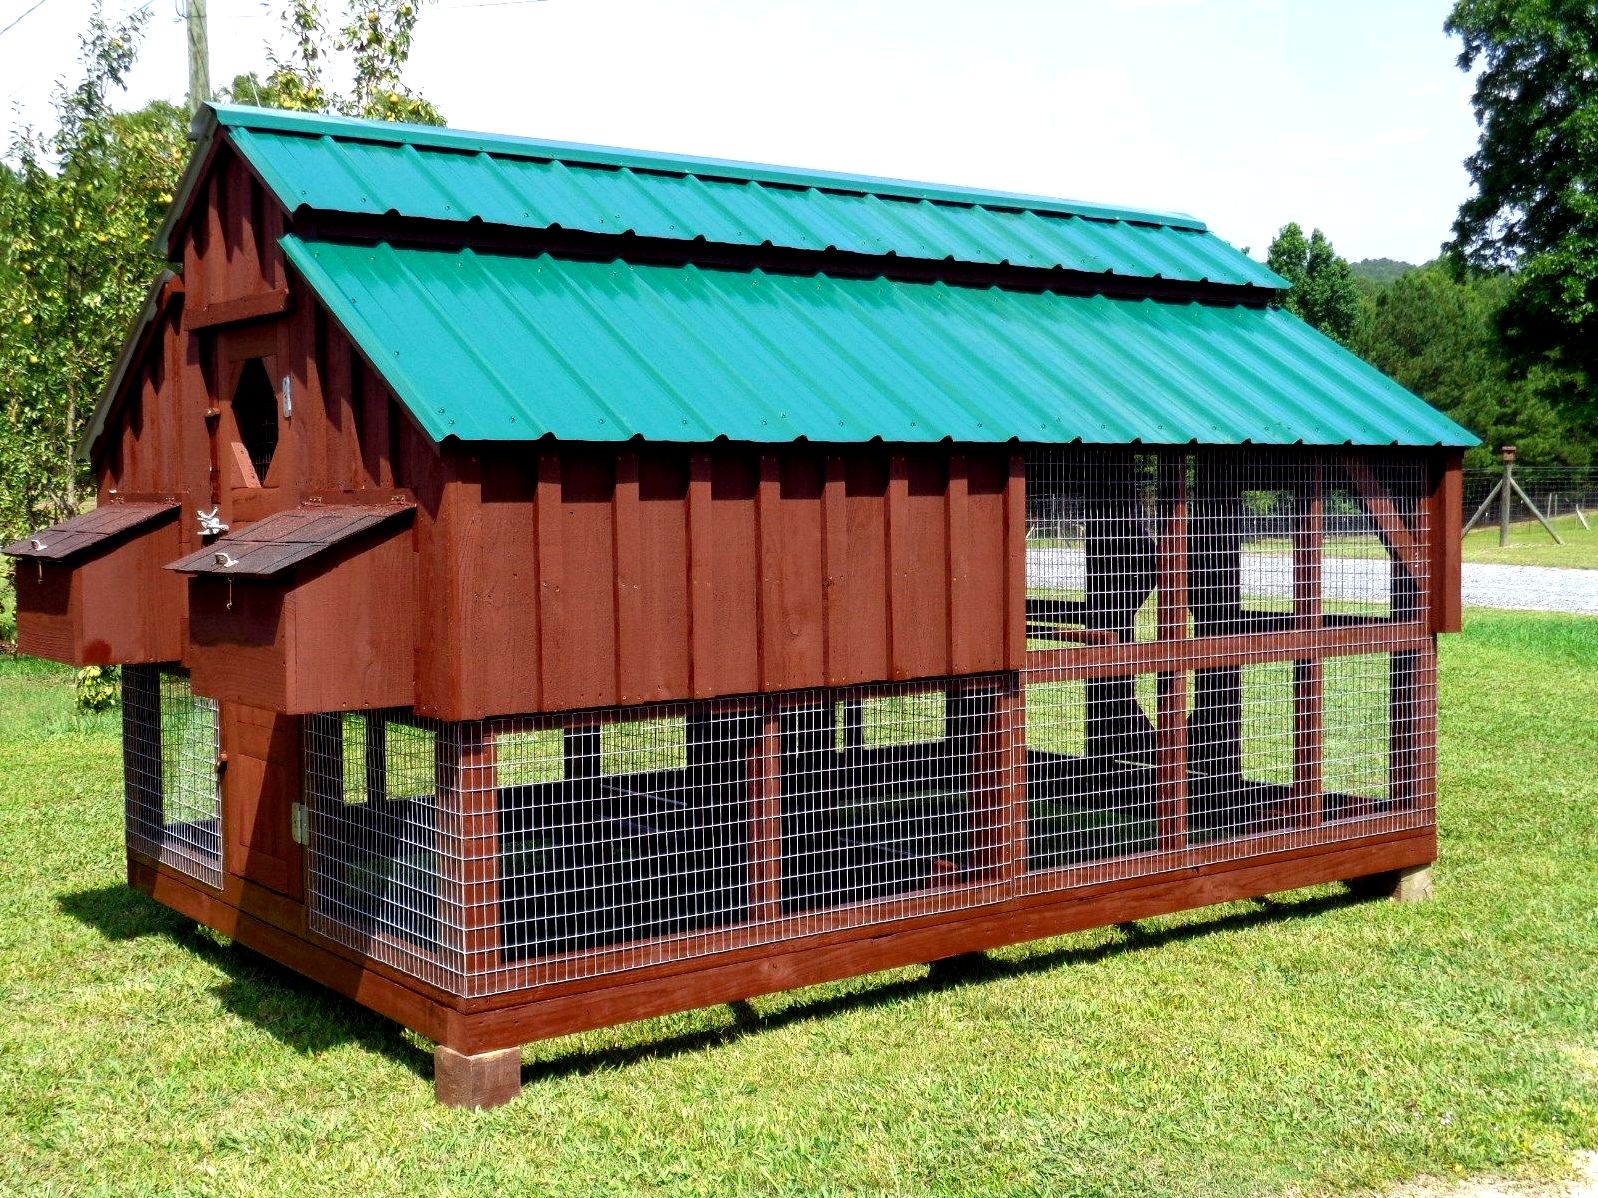 Backyard chicken house designs - how can you choose? than being not big enough